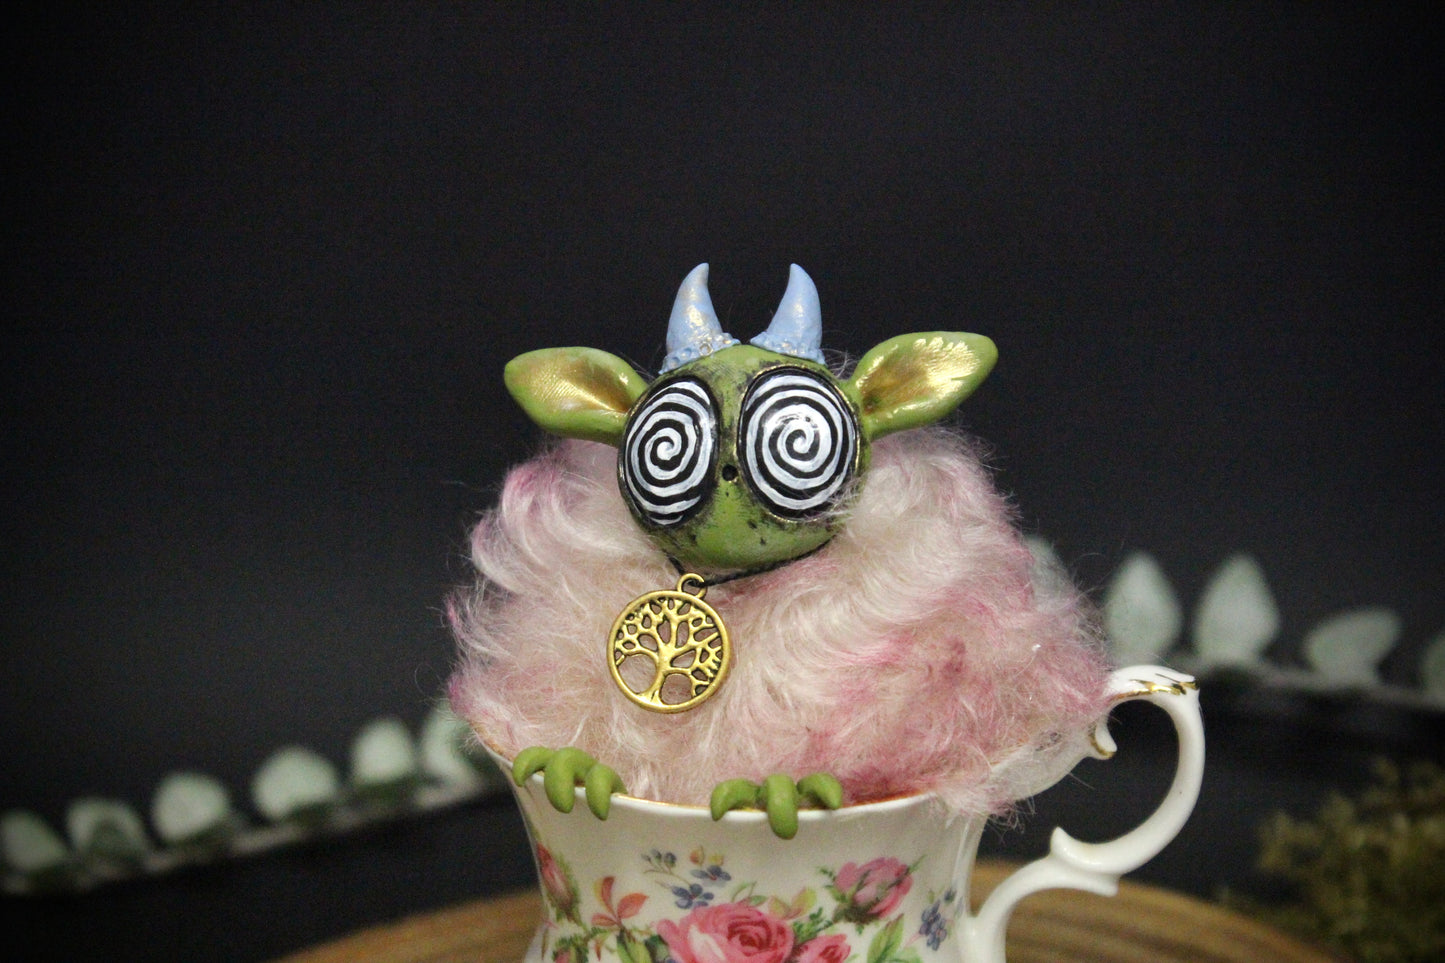 Florence the Teacup Critter